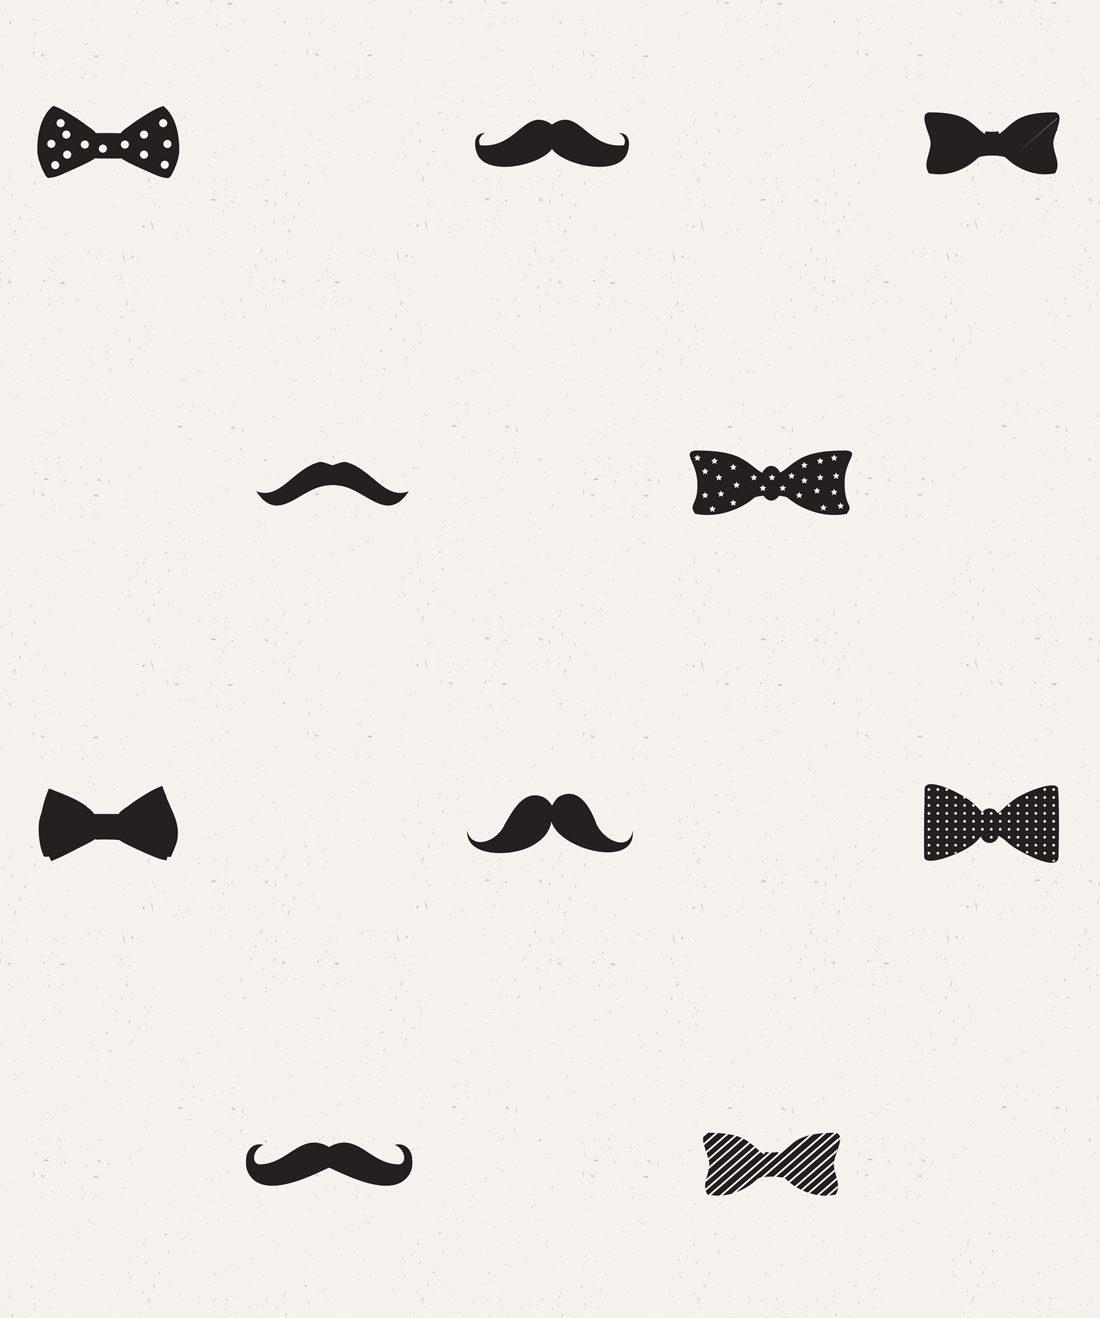 Bow Ties & Mustaches Wallpaper, Cool